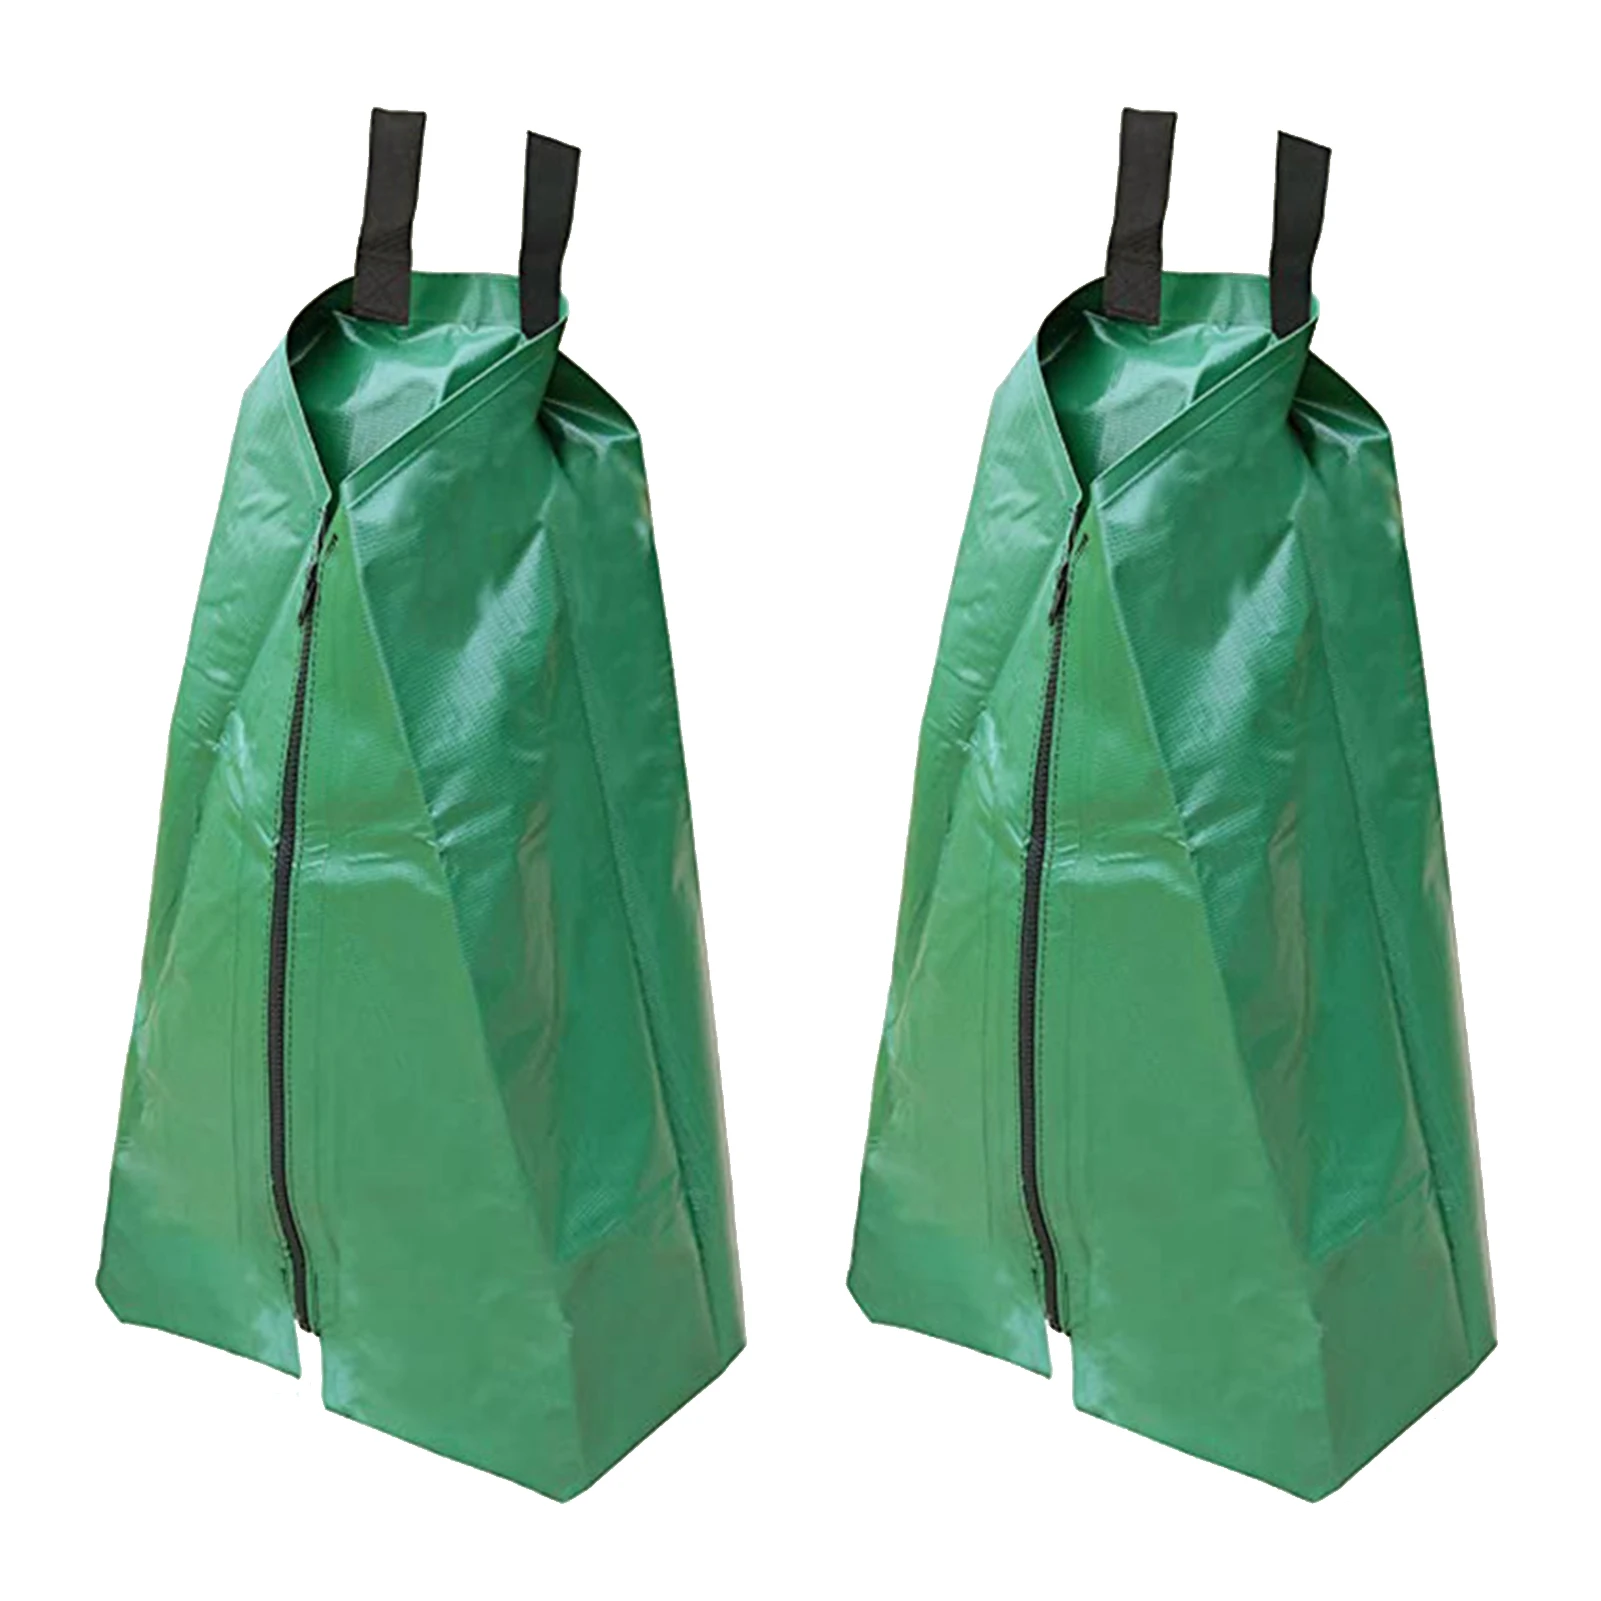 2pcs Targeted UV Stable Ring Shape Large Green 20 Gallon Tree Watering Bag Shrub Slow Release PVC Drip Gardening Tool Continuous